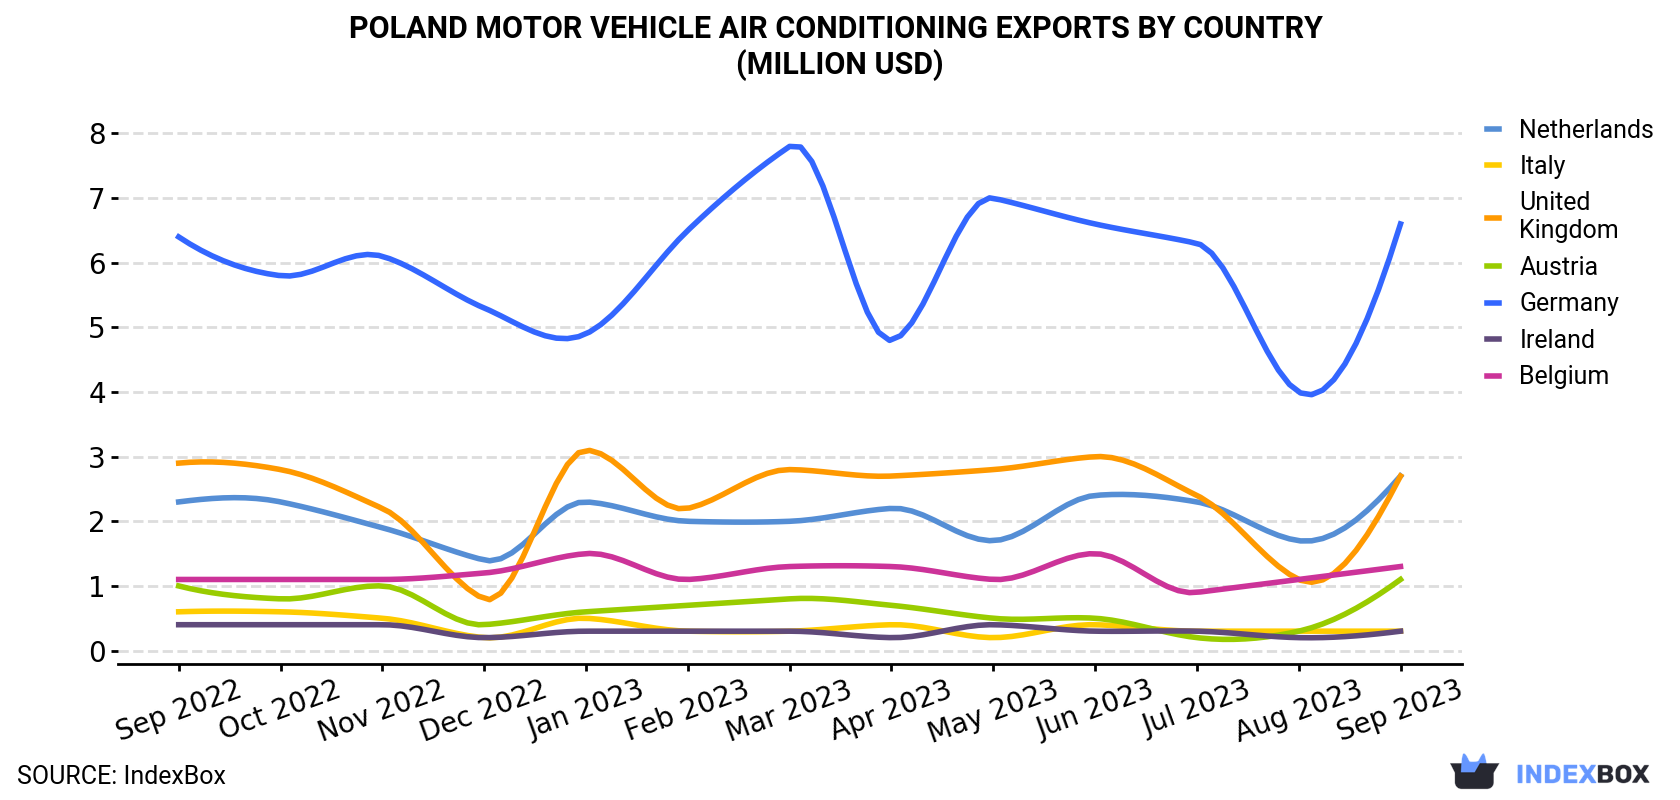 Poland Motor Vehicle Air Conditioning Exports By Country (Million USD)